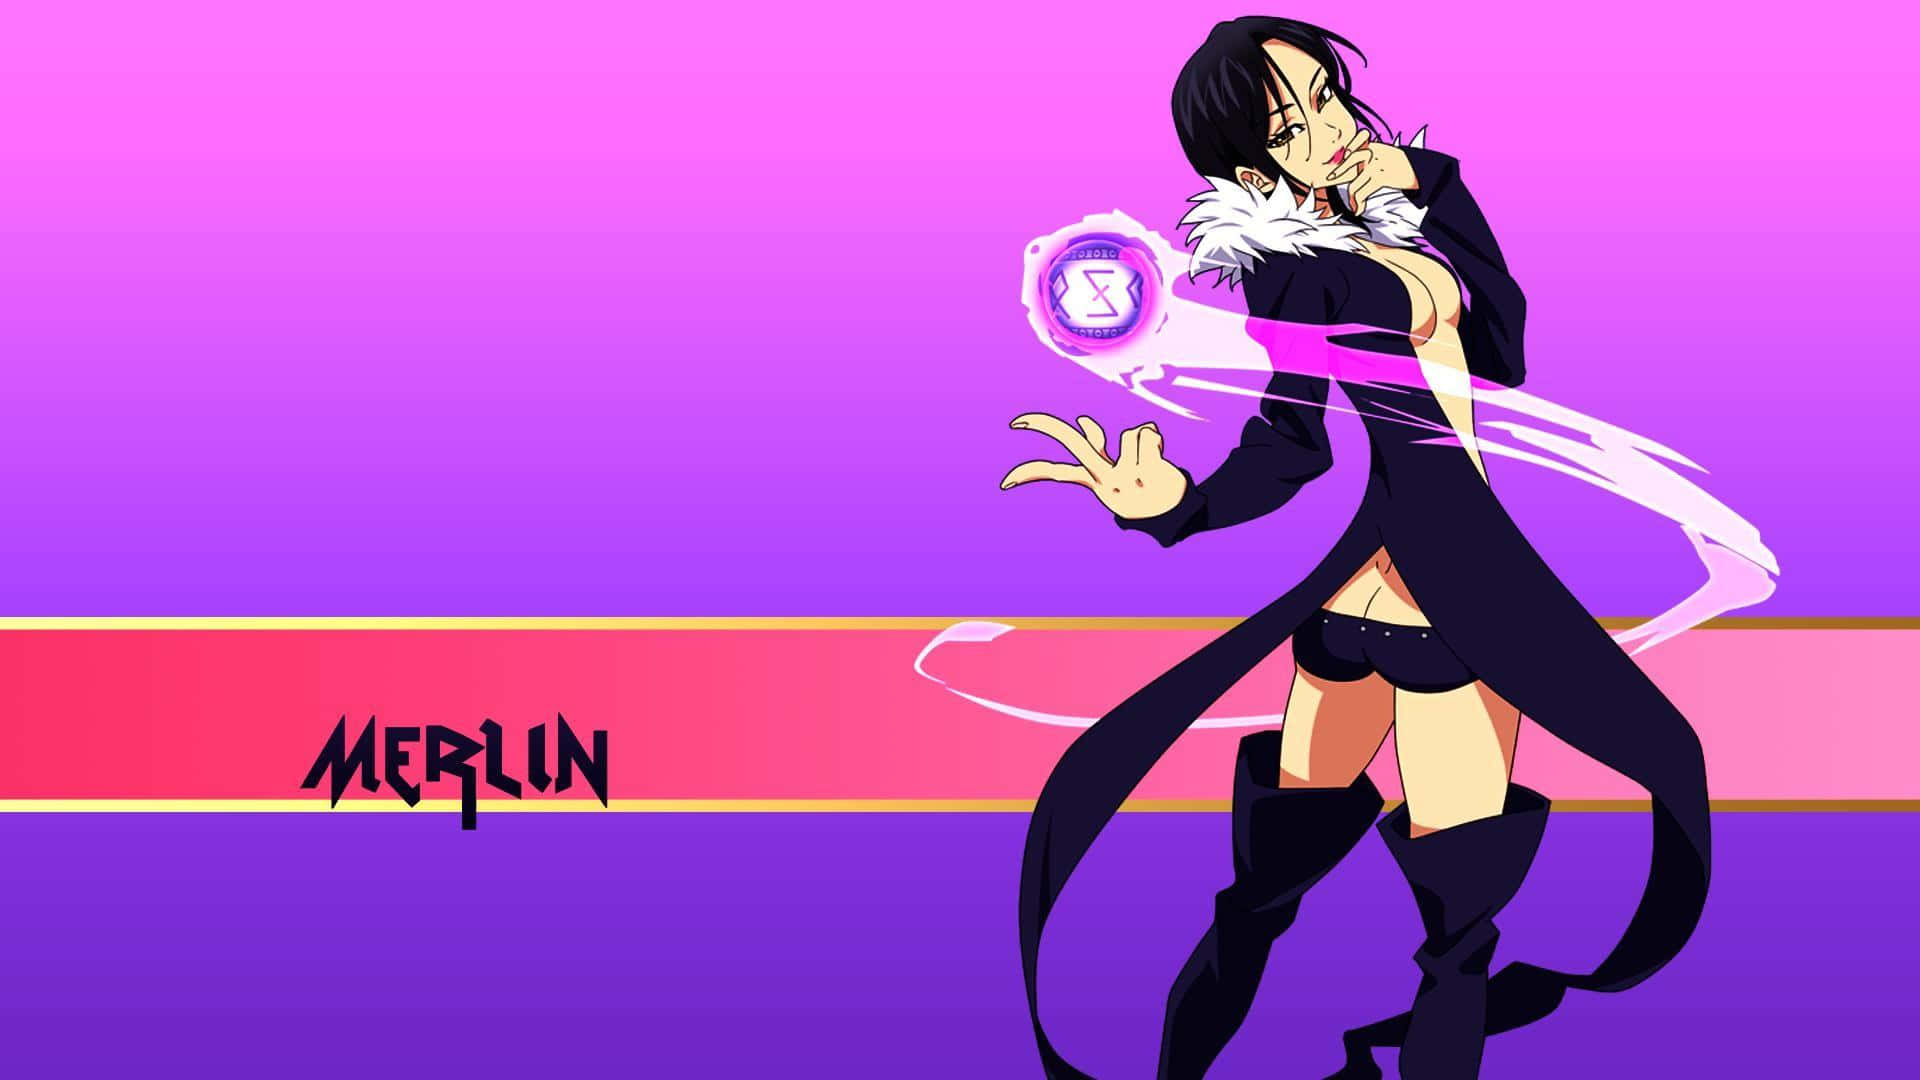 Mysterious Sorceress Merlin from the Seven Deadly Sins Anime Wallpaper